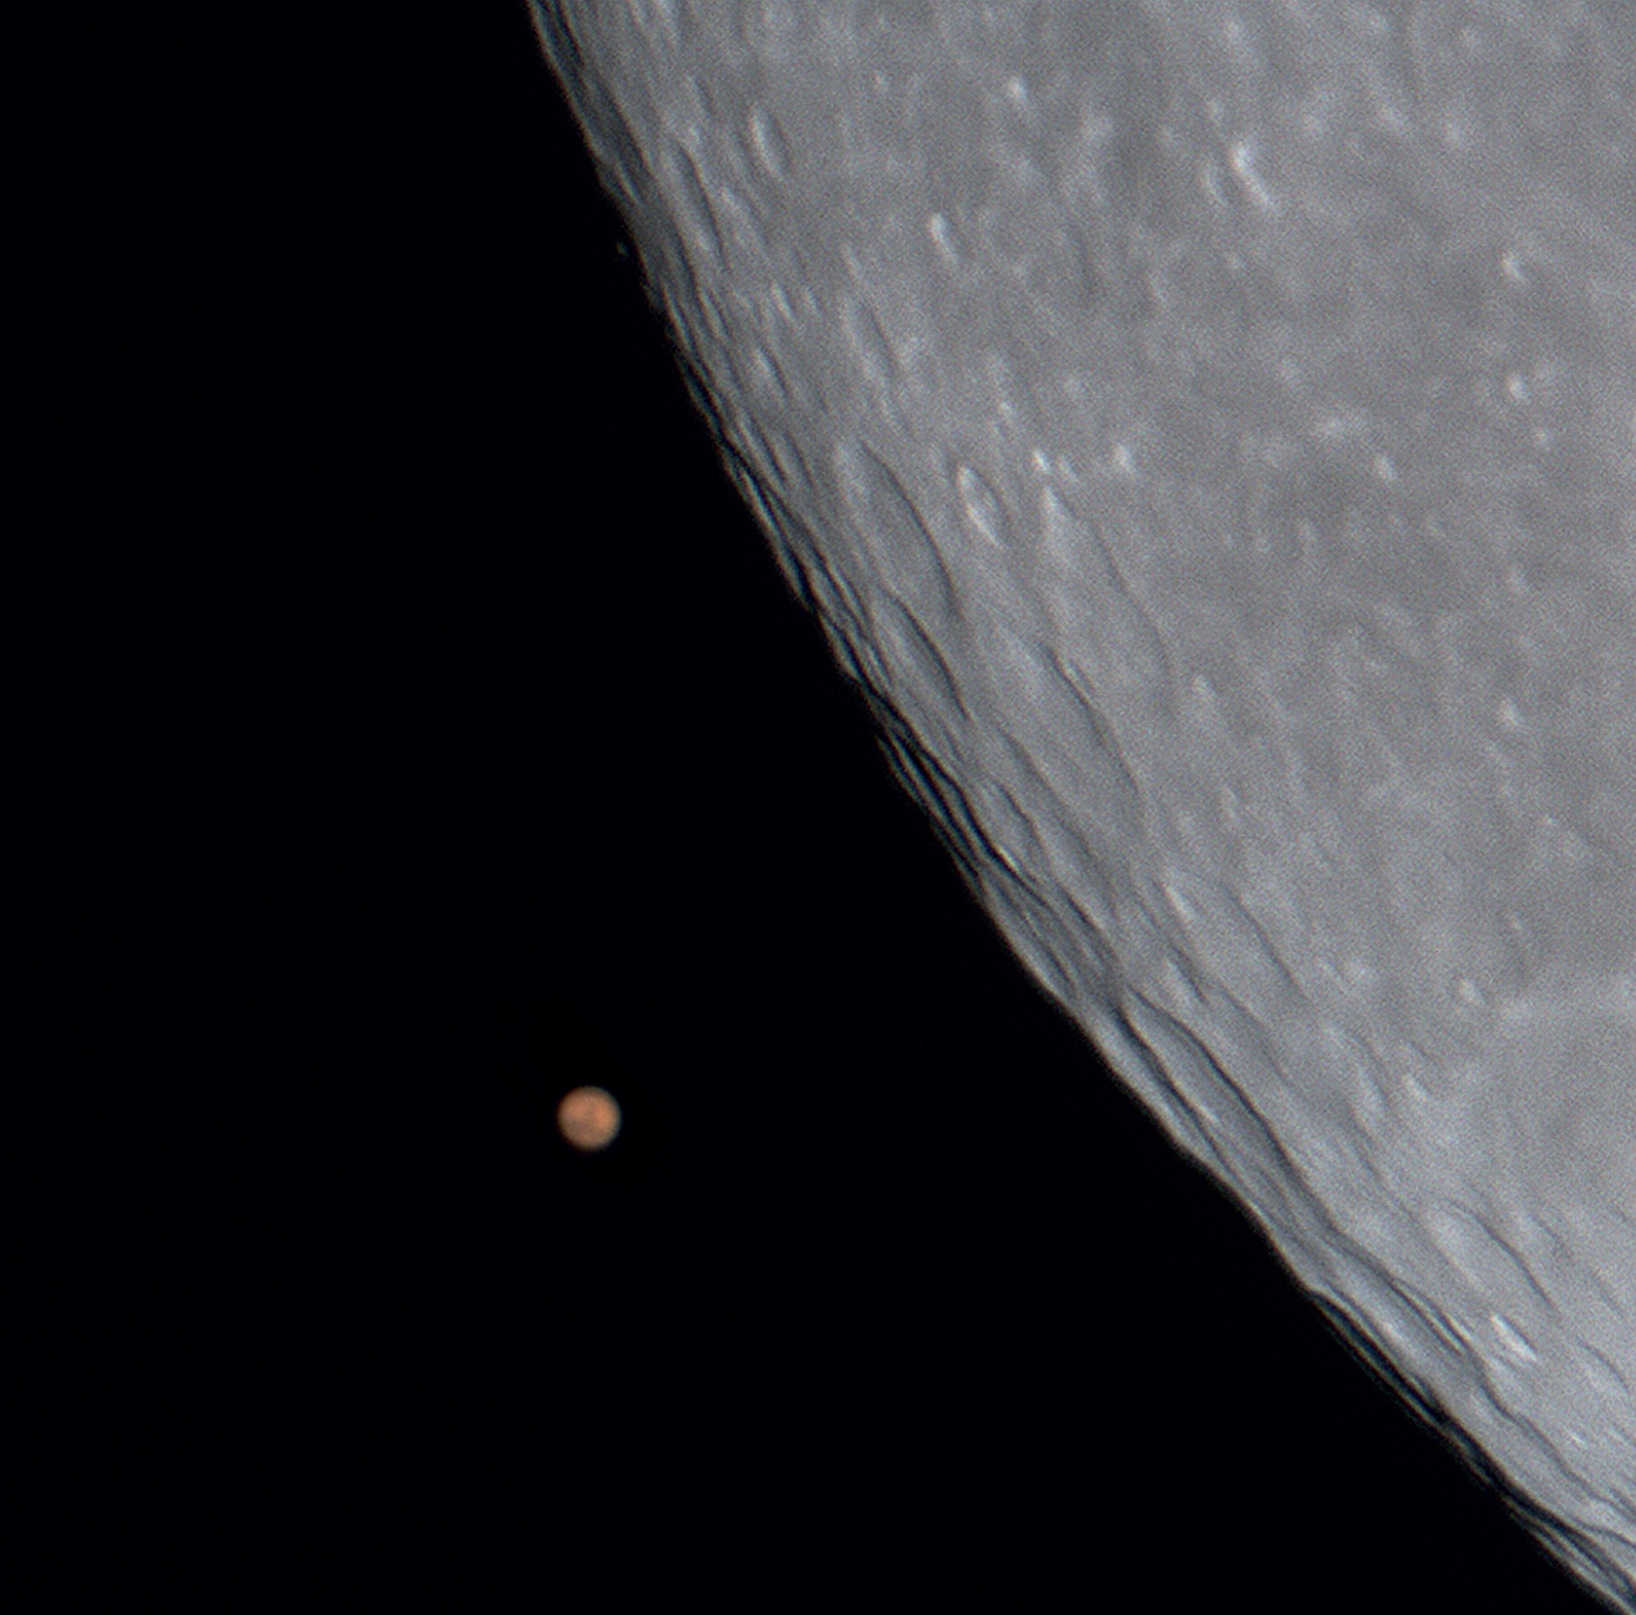 Near occultation of the planet Mars by the Moon on 24.12.2007. Captured with an uncooled CCD camera on a SCT with 200mm aperture and a 2,000mm focal length. U. Dittler